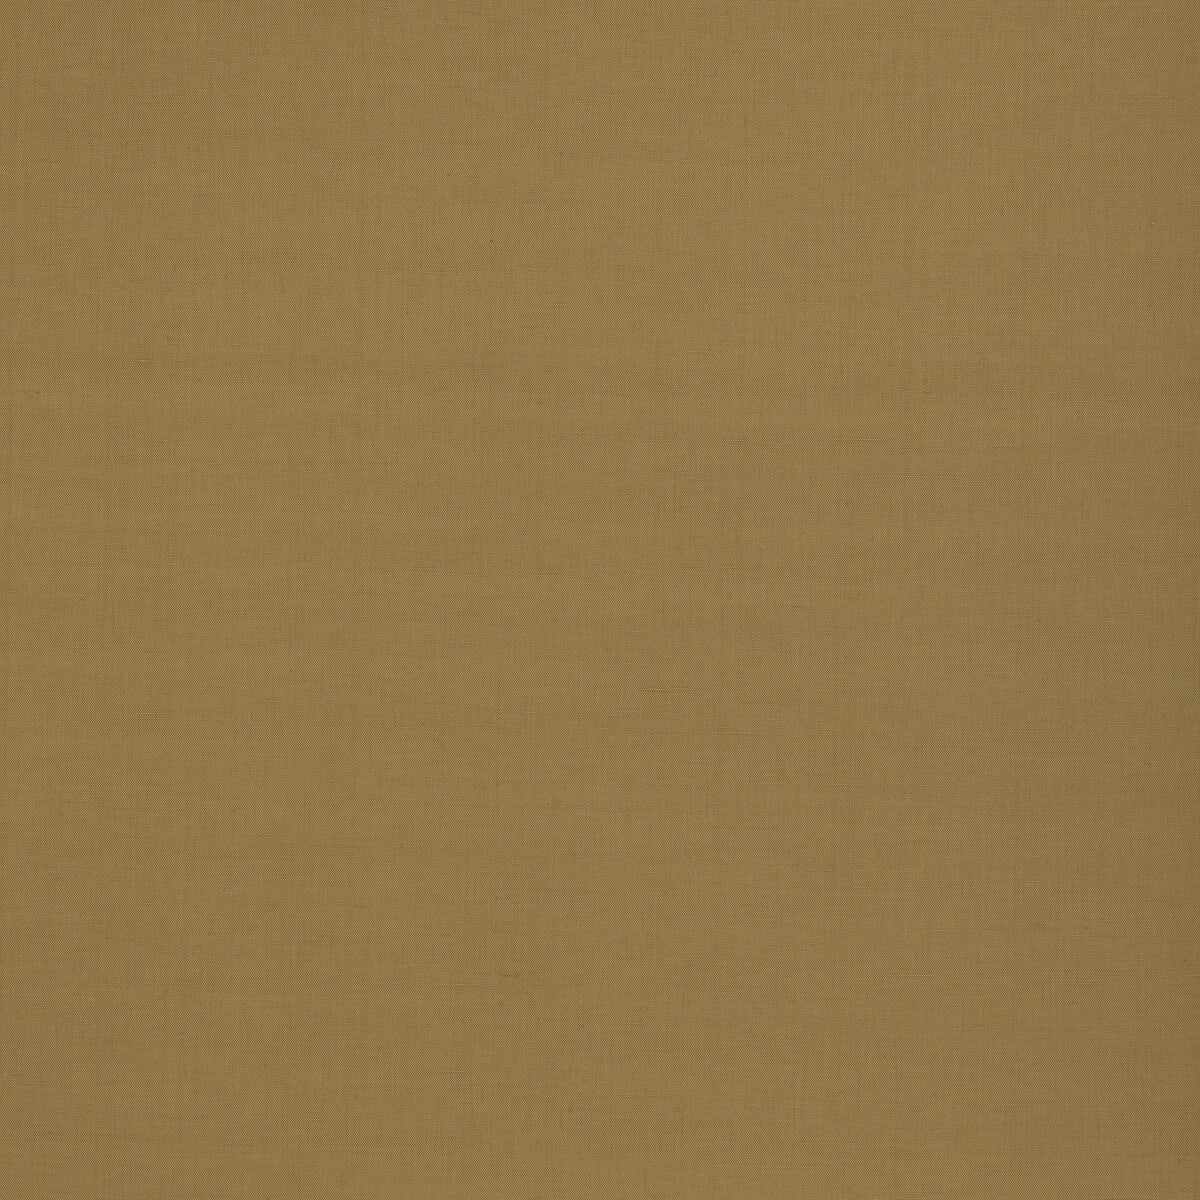 Kemble fabric in ochre color - pattern BF11046.840.0 - by G P &amp; J Baker in the Baker House Plain &amp; Stripe II collection